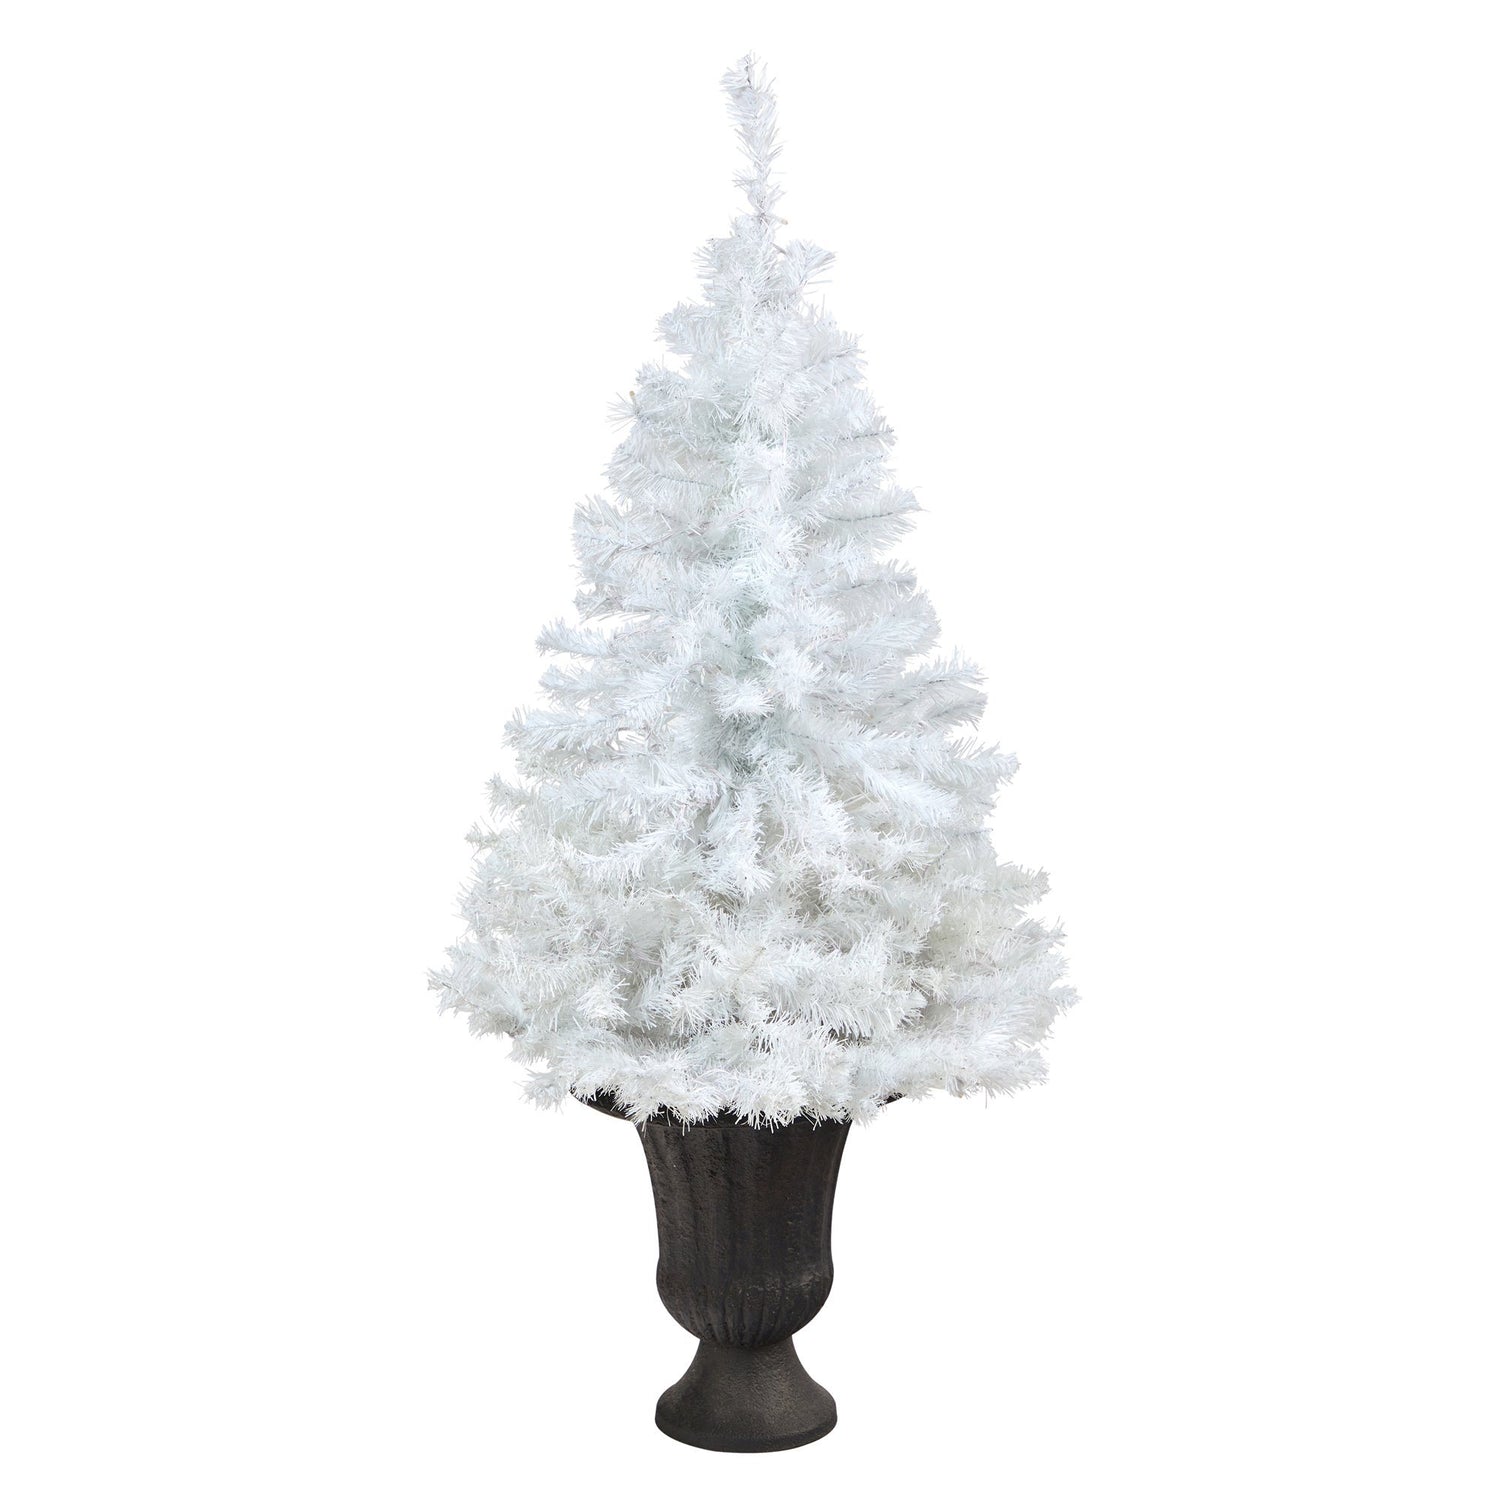 50” White Artificial Christmas Tree with 100 Clear LED Lights in Charcoal Planter